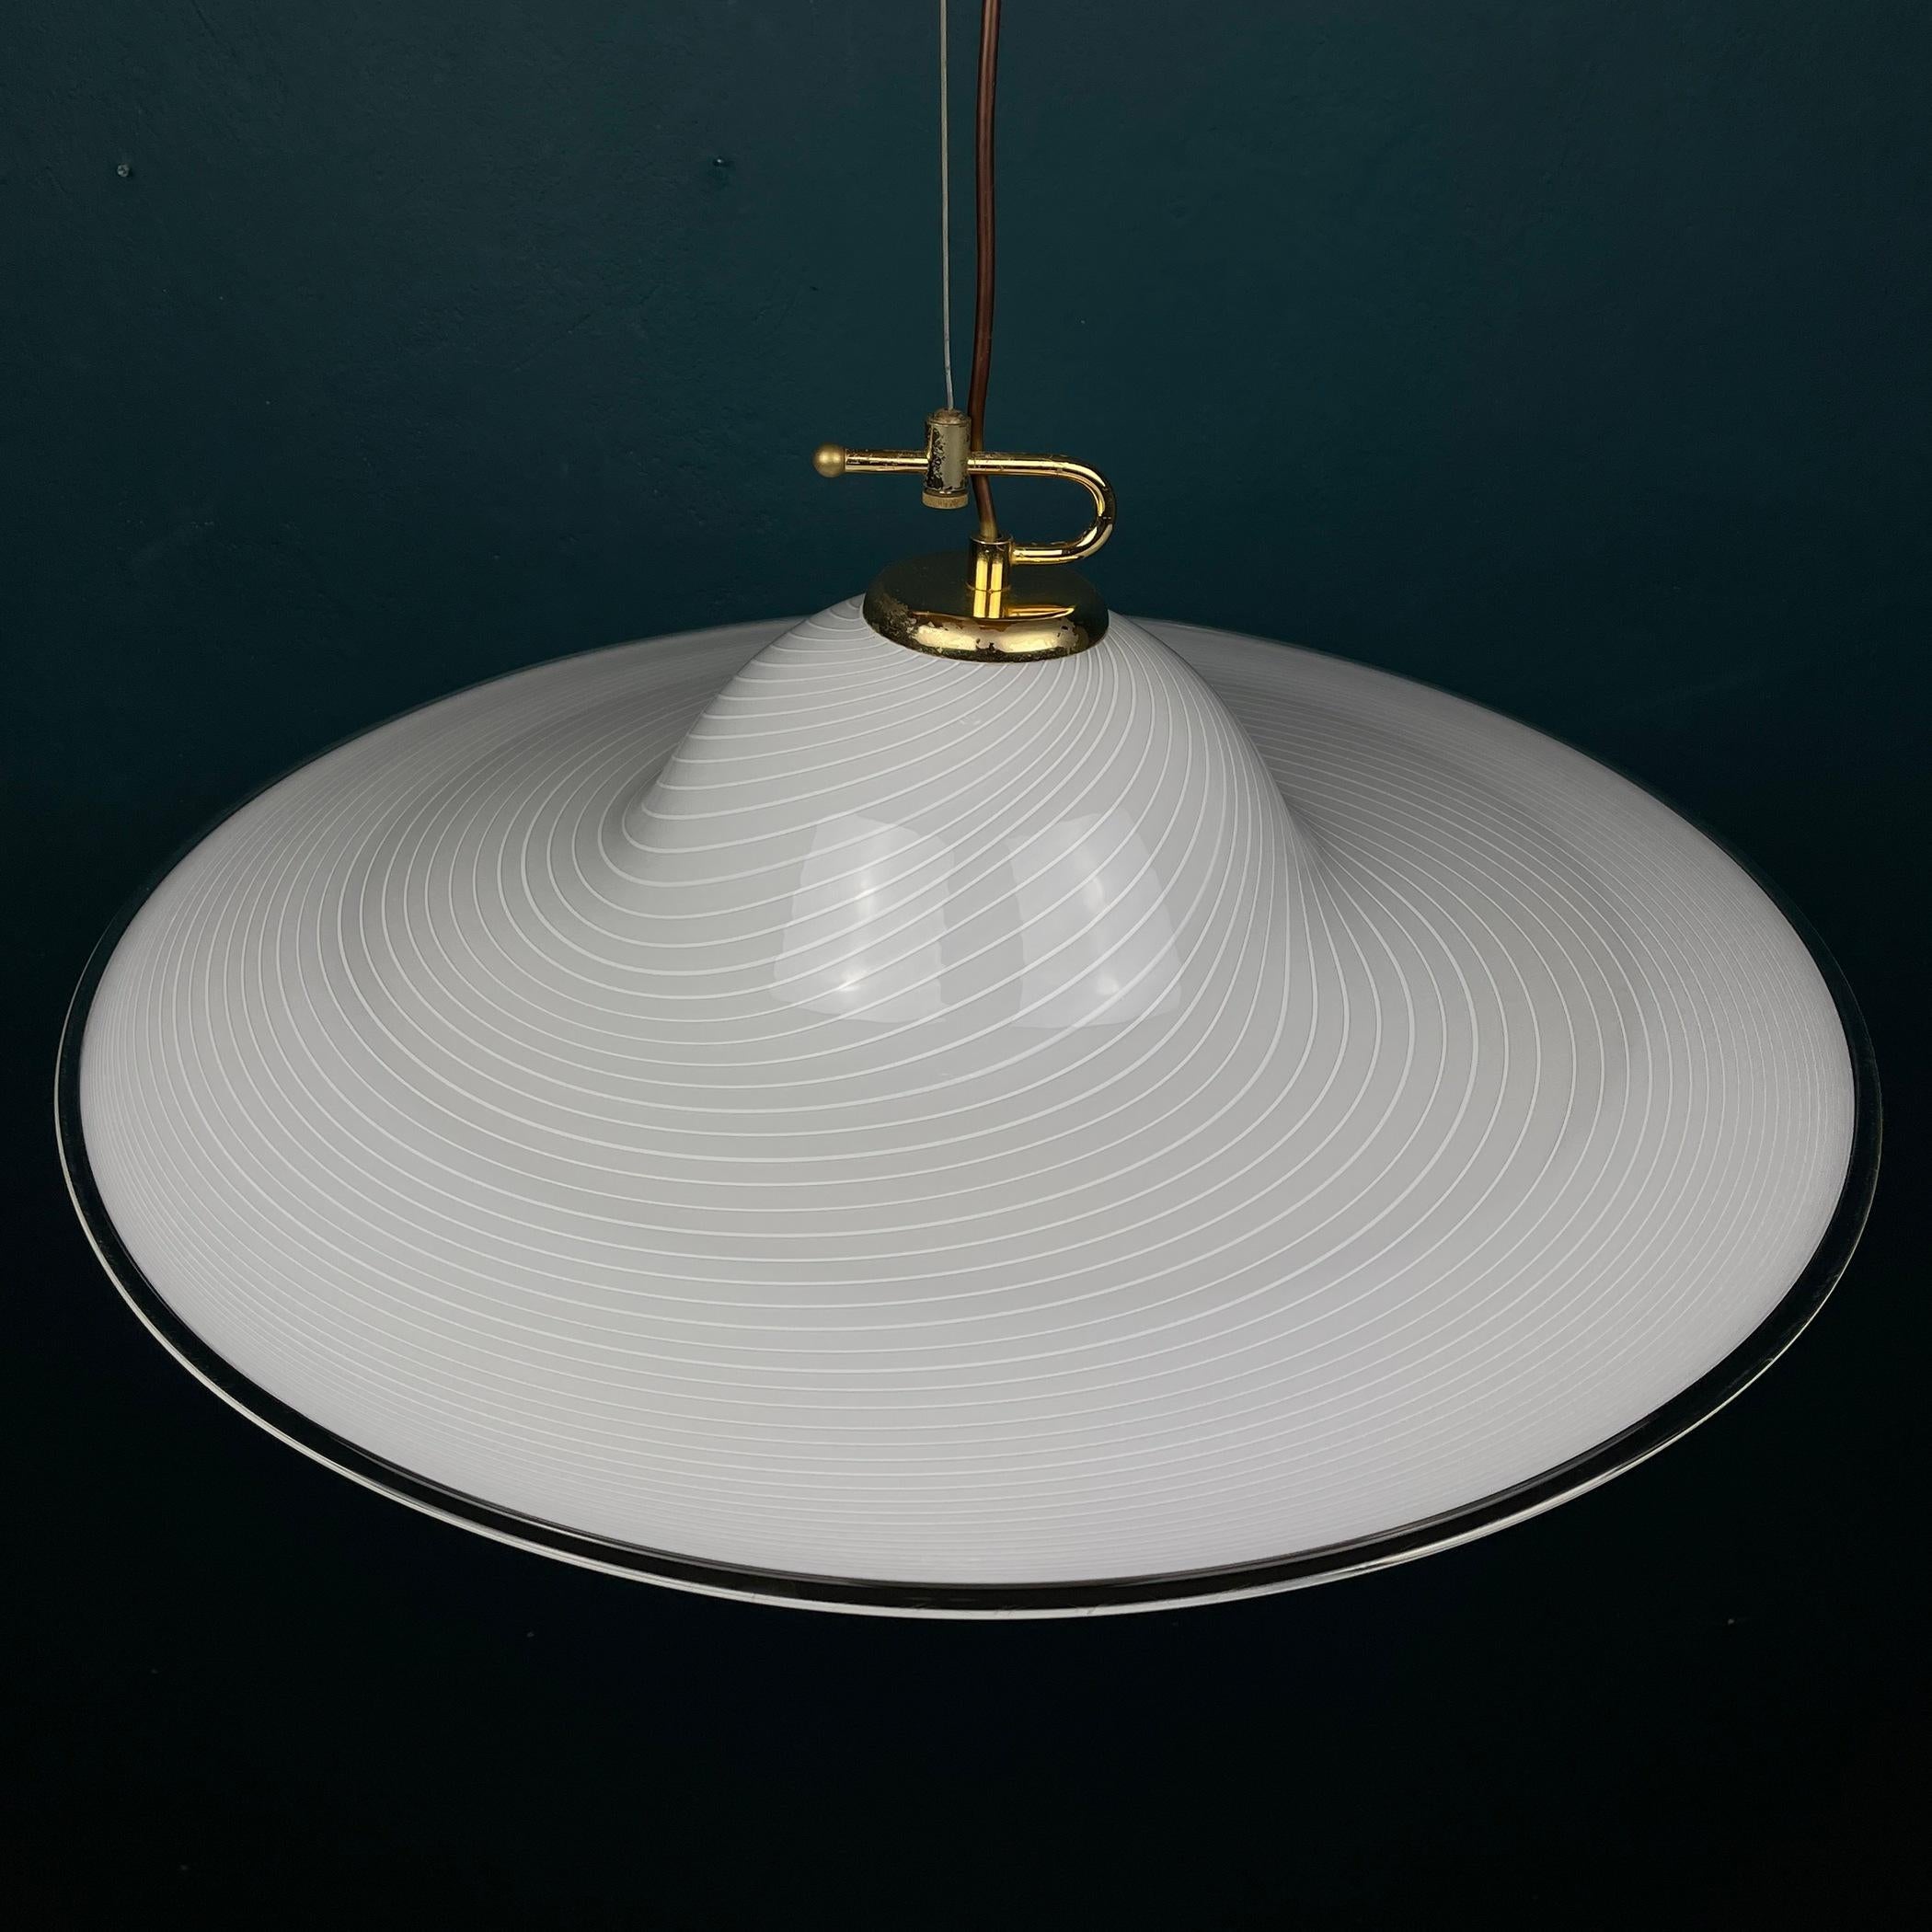 This swirl vintage Murano pendant lamp Vetri Murano was made in Italy in the 1970s. Very beautiful white Murano glass with bends in the form of a tulip. Perfect vintage condition. No chips or cracks. Requires a standard Edison E27 with a screw lamp.